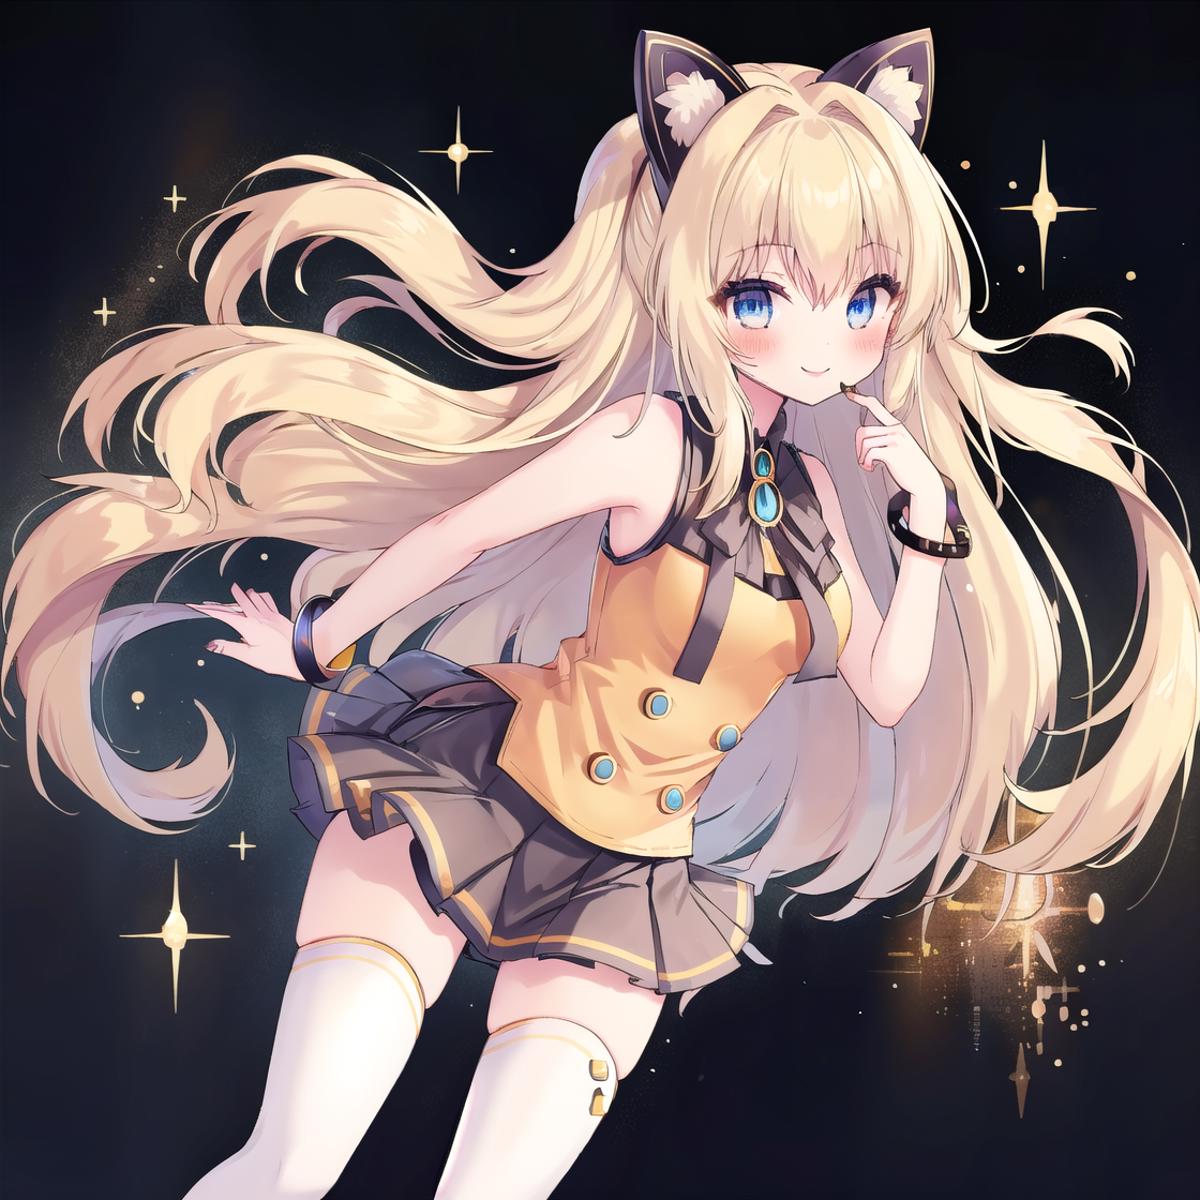 SEEU (VOCALOID) image by empty_girl